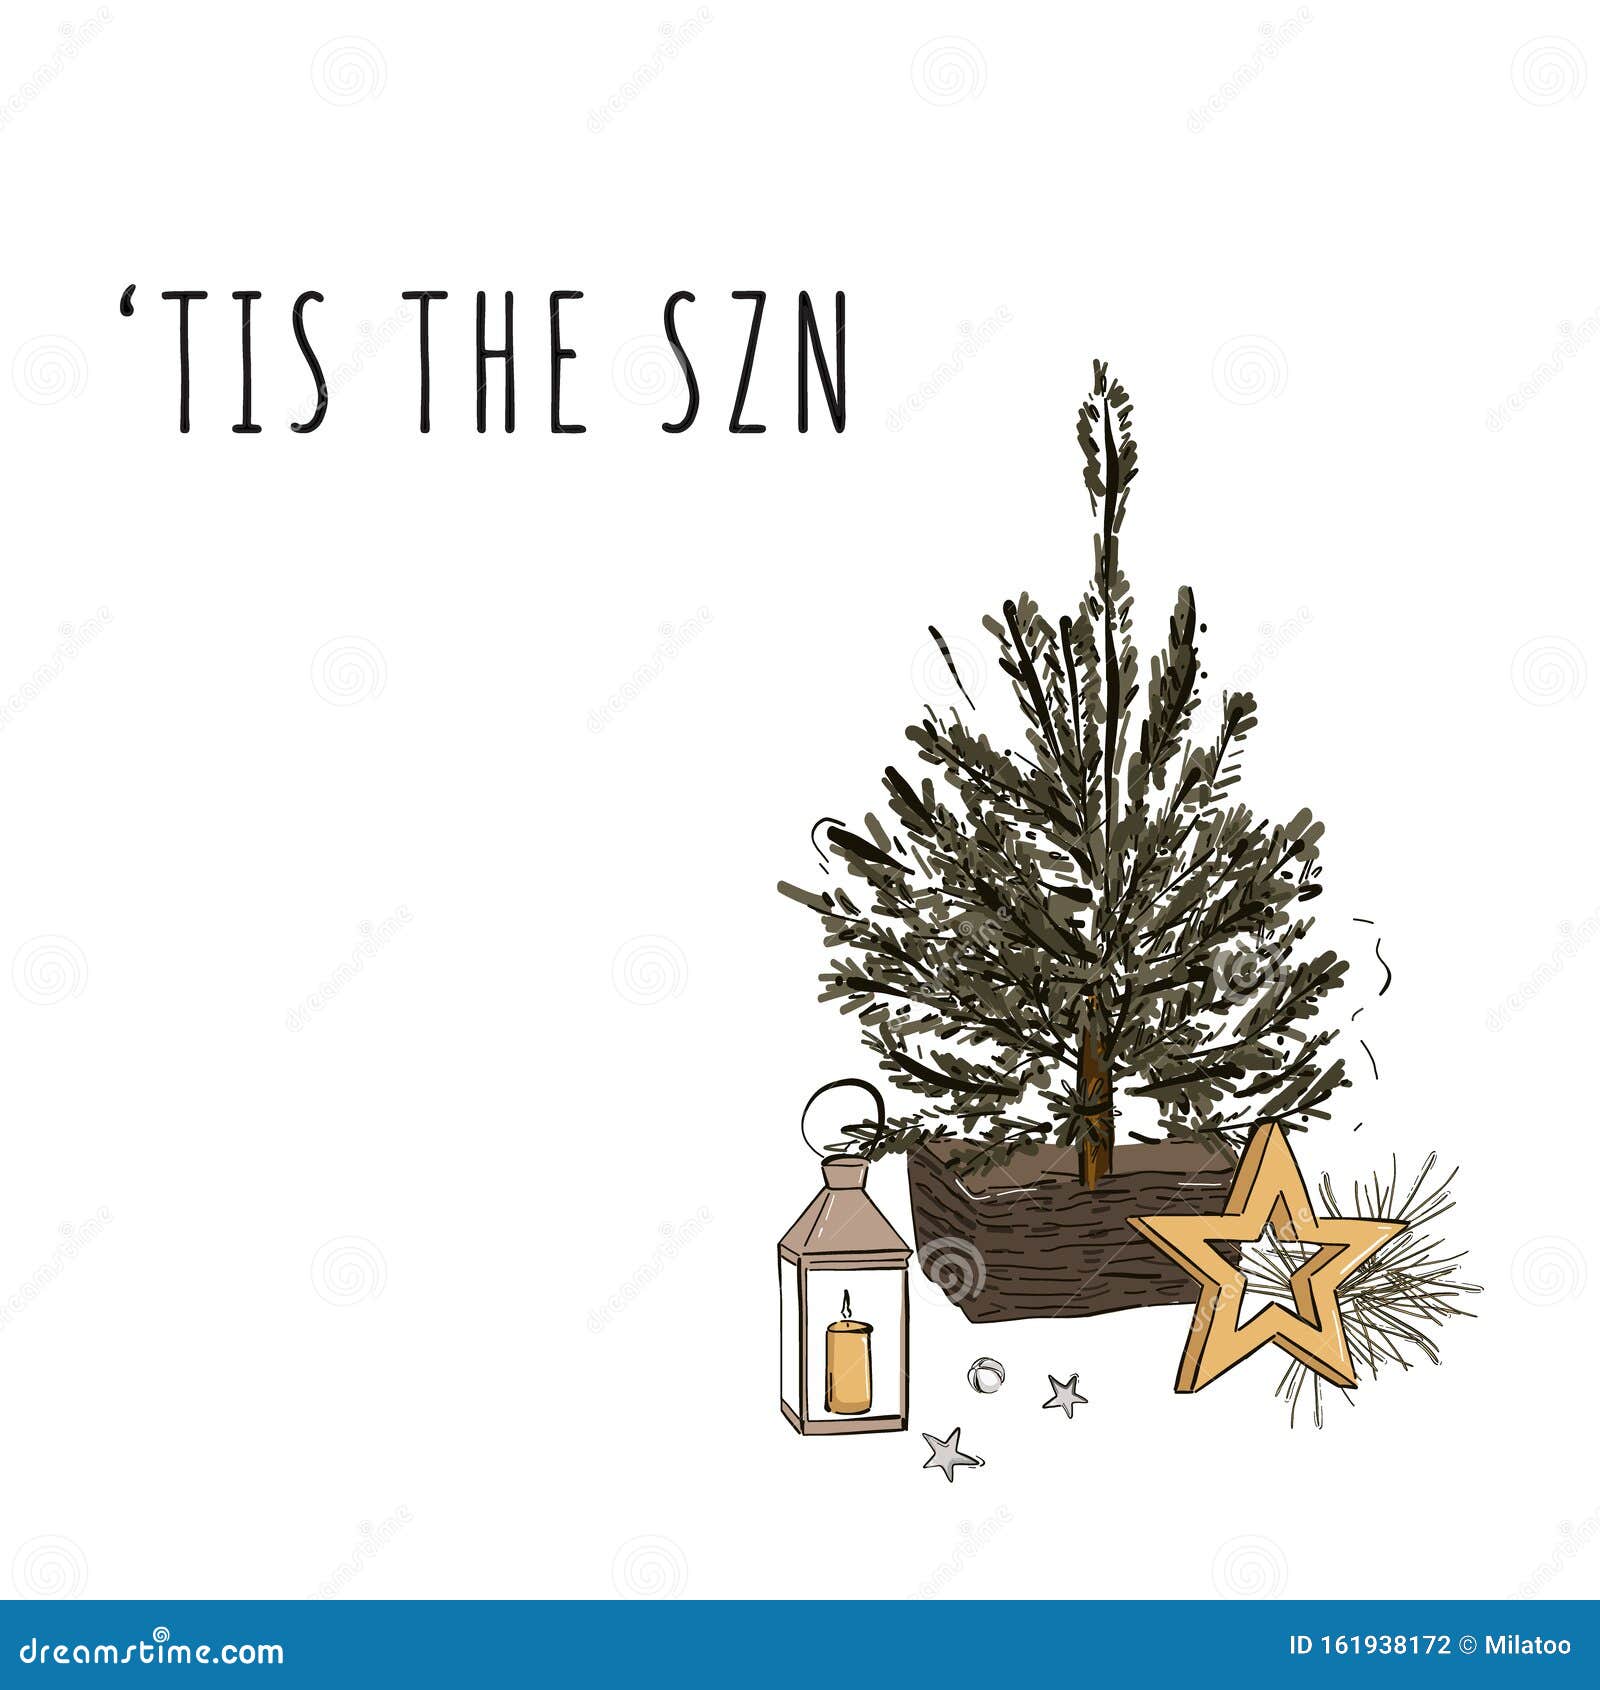 christmas lanterns candles decoration with new year holiday tree, gold star, jingle bells and tis the szn quote hand-drawn 